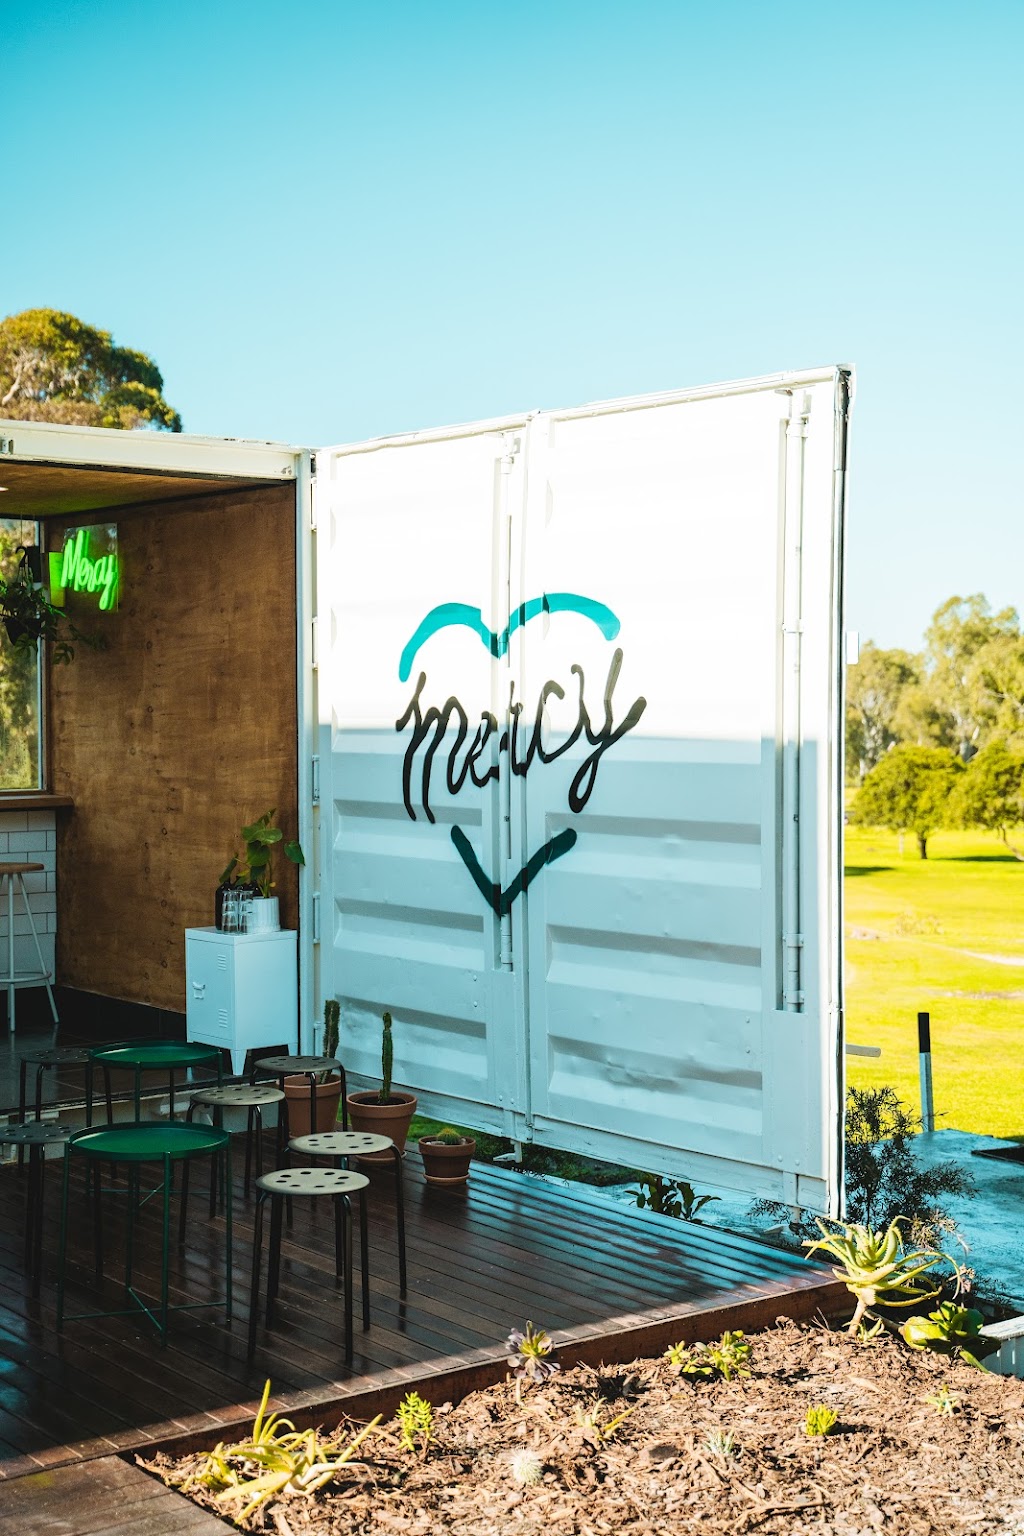 Mercy Cafe | cafe | 401 Eastern Park Circuit, East Geelong VIC 3219, Australia | 0490849491 OR +61 490 849 491